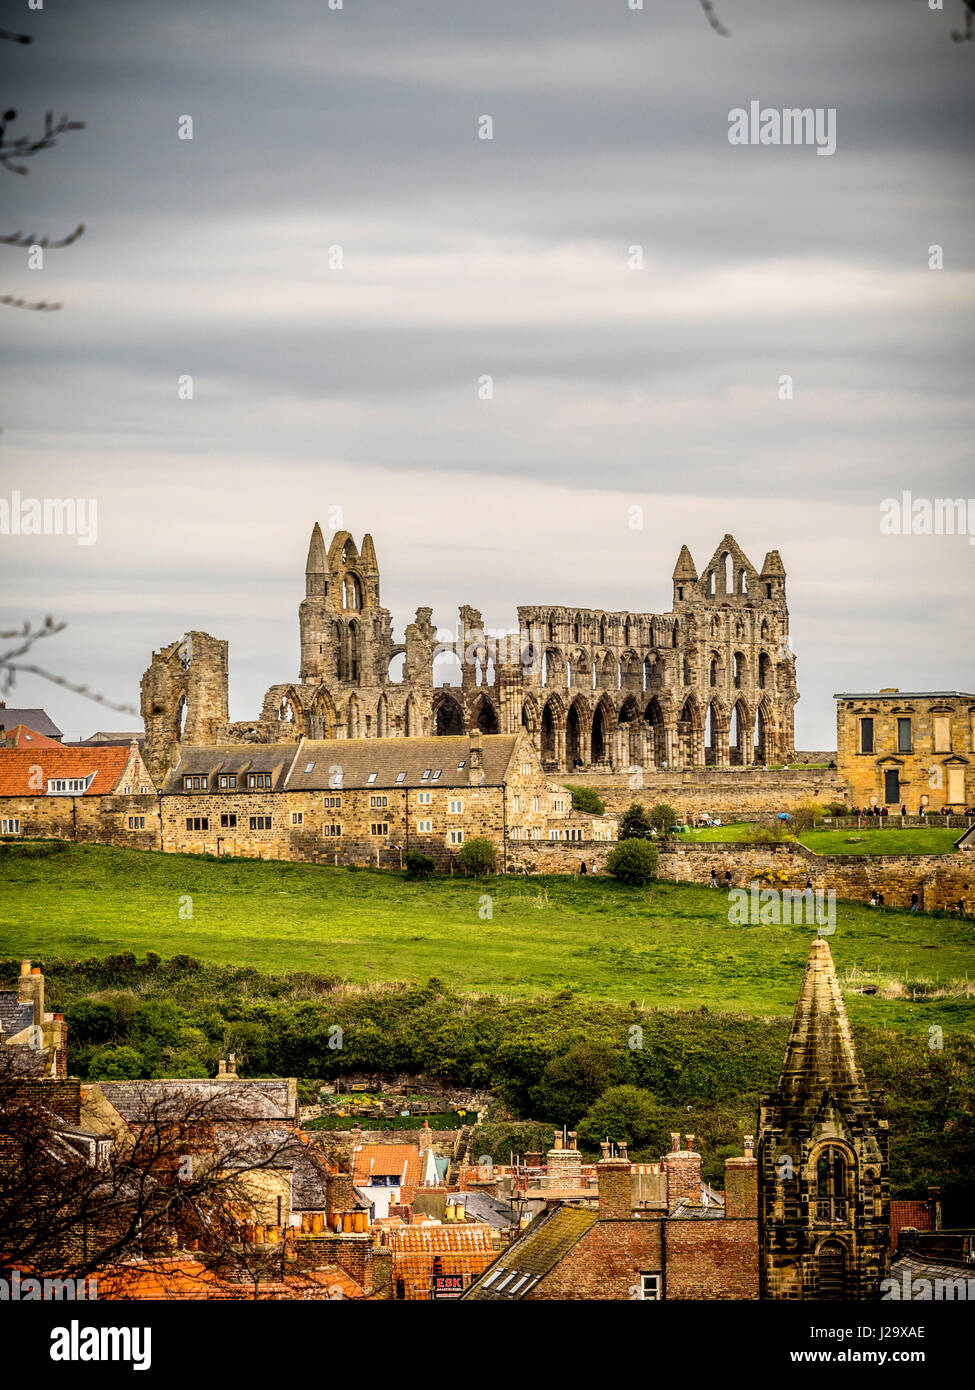 Whitby Abbey viewed from Pannett Gardens, Whitby, UK. Stock Photo